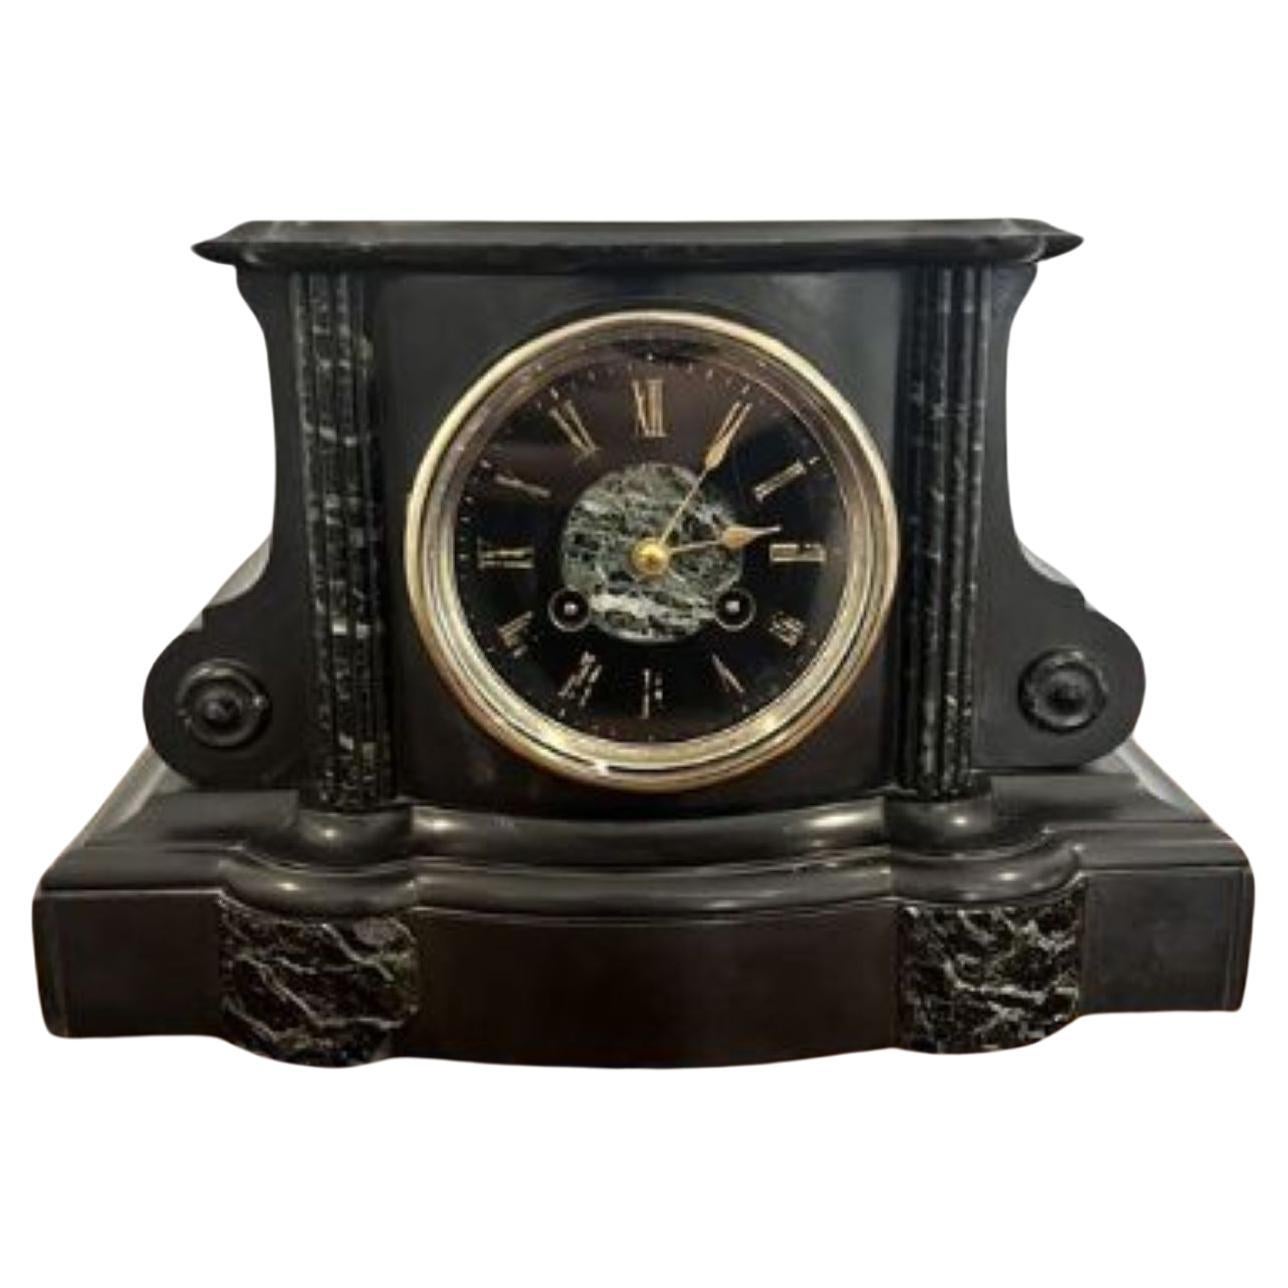 Quality antique Victorian eight day mantle clock 